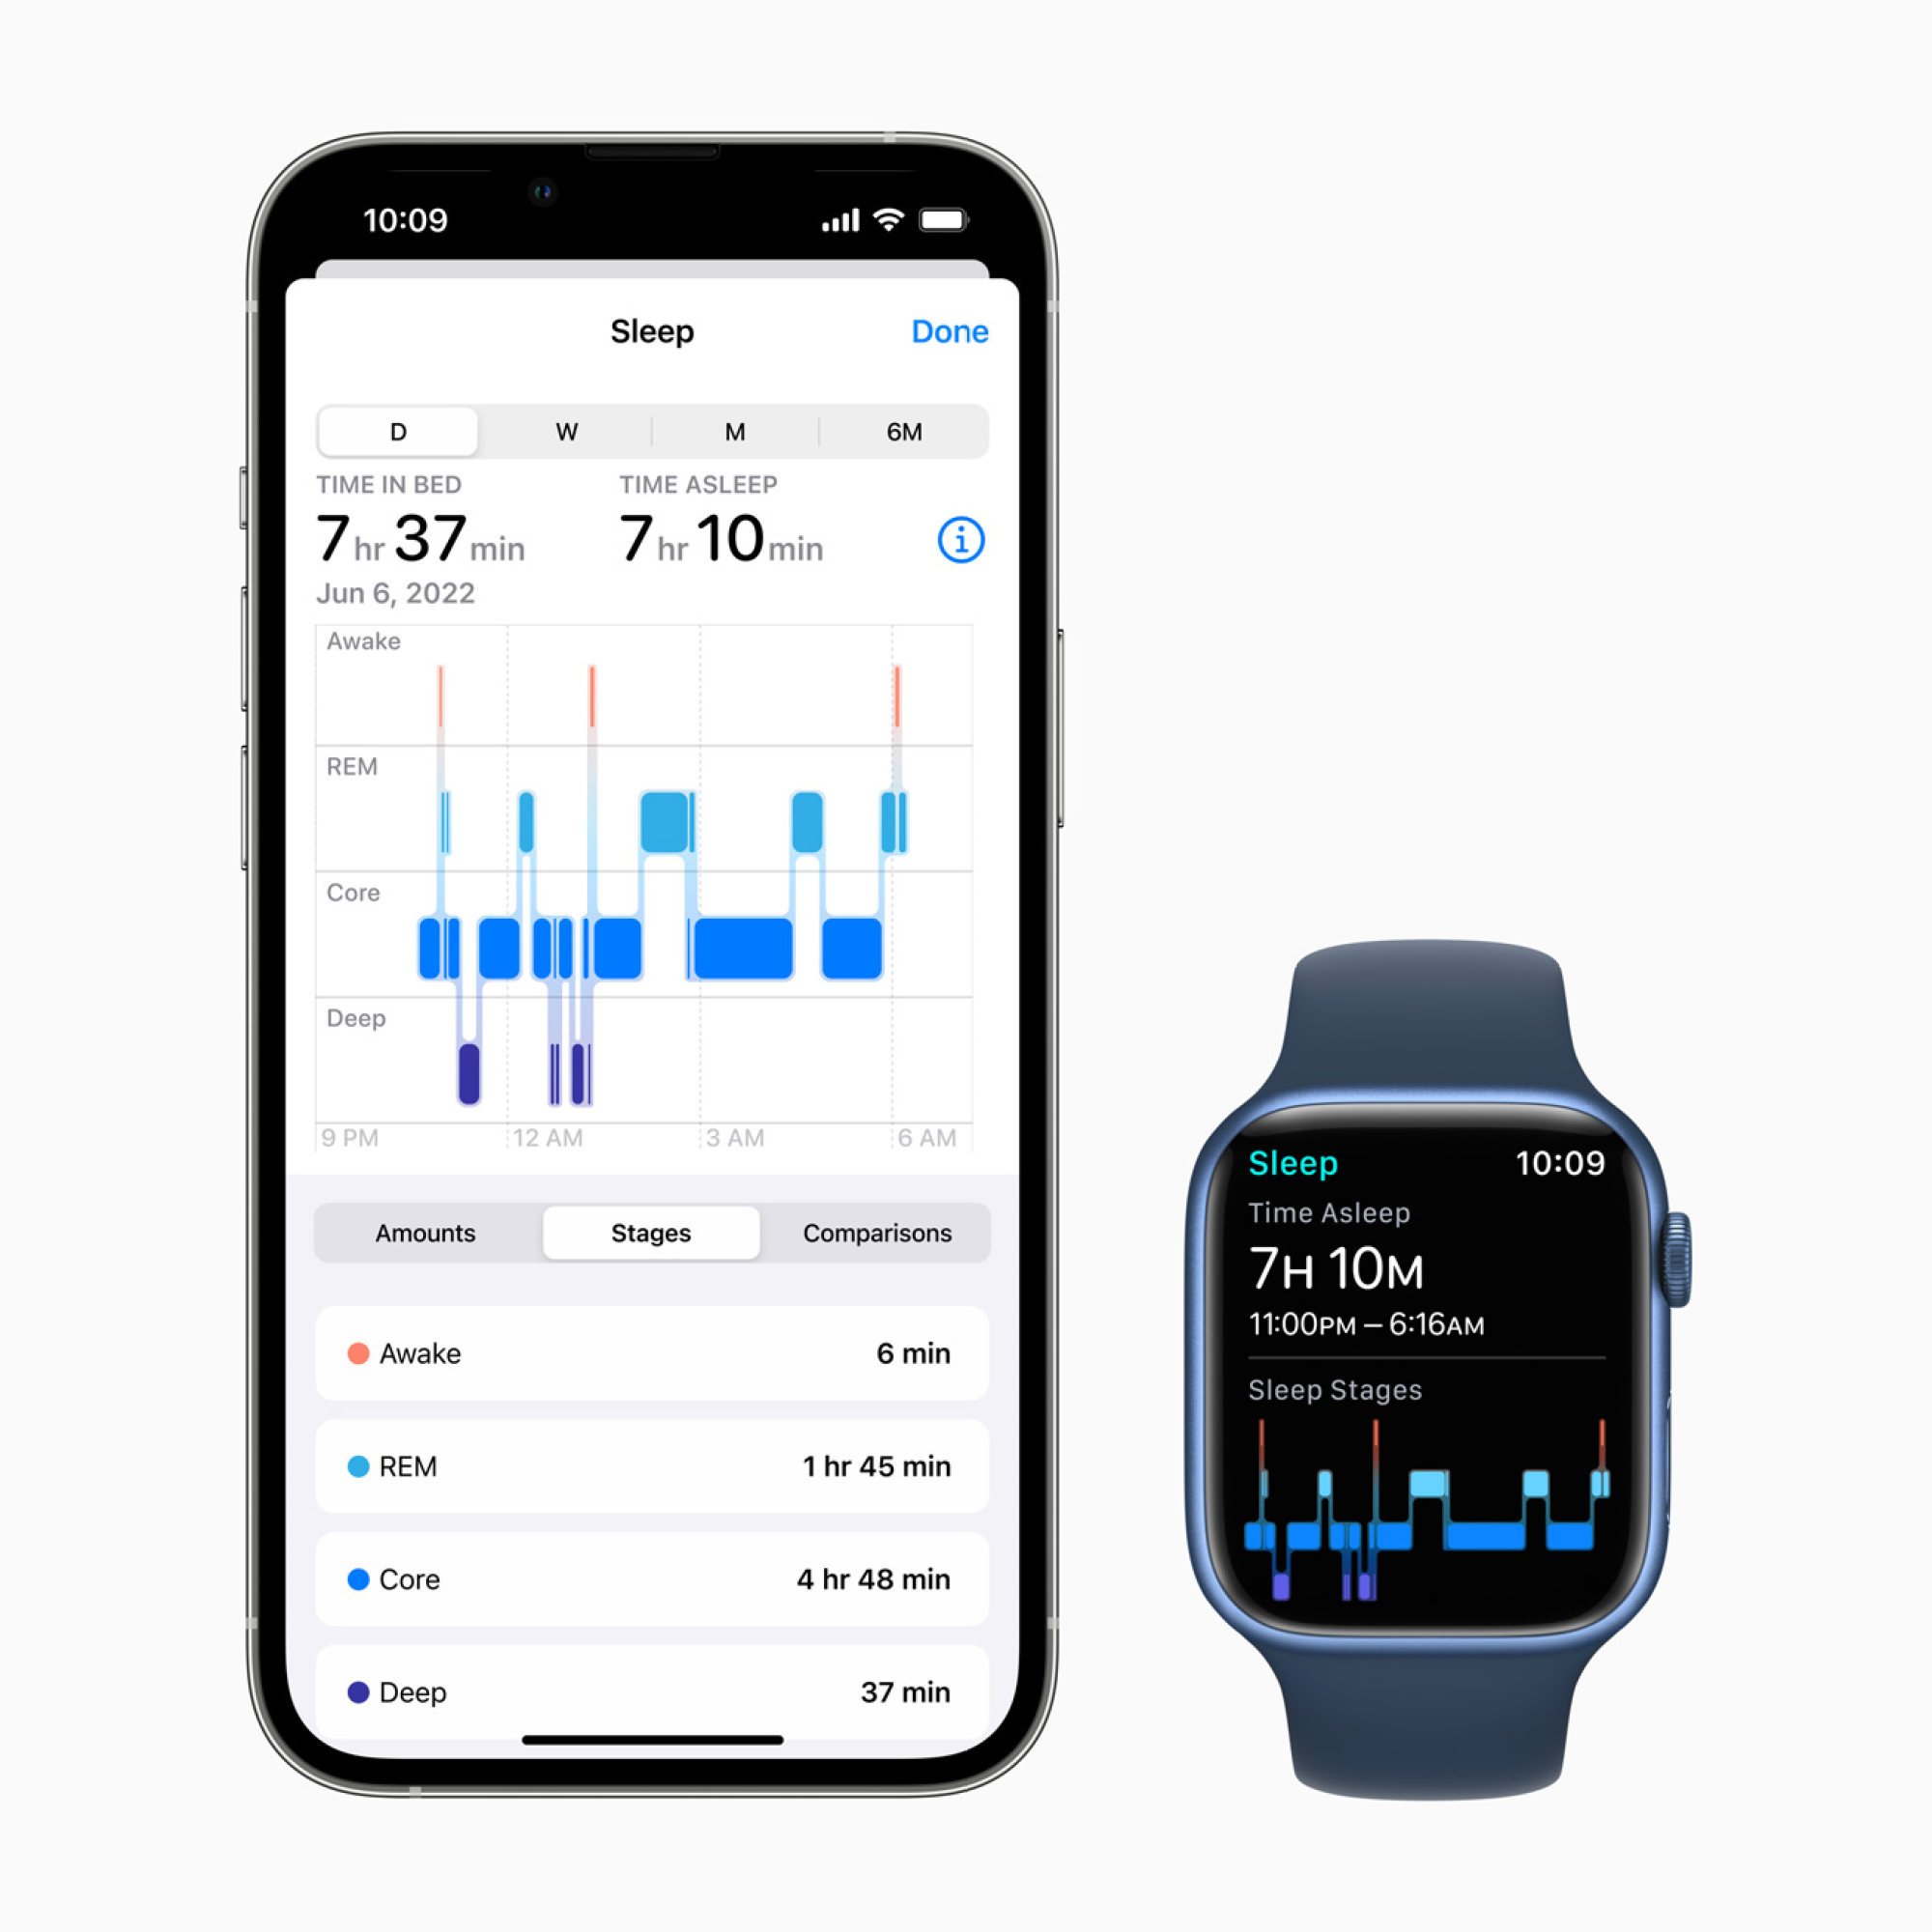 With watchOS 9 update, Apple Watch tracks sleep cycle stages and gives you a detailed breakdown. Is this Apple catching up with Fitbit and Samsung?